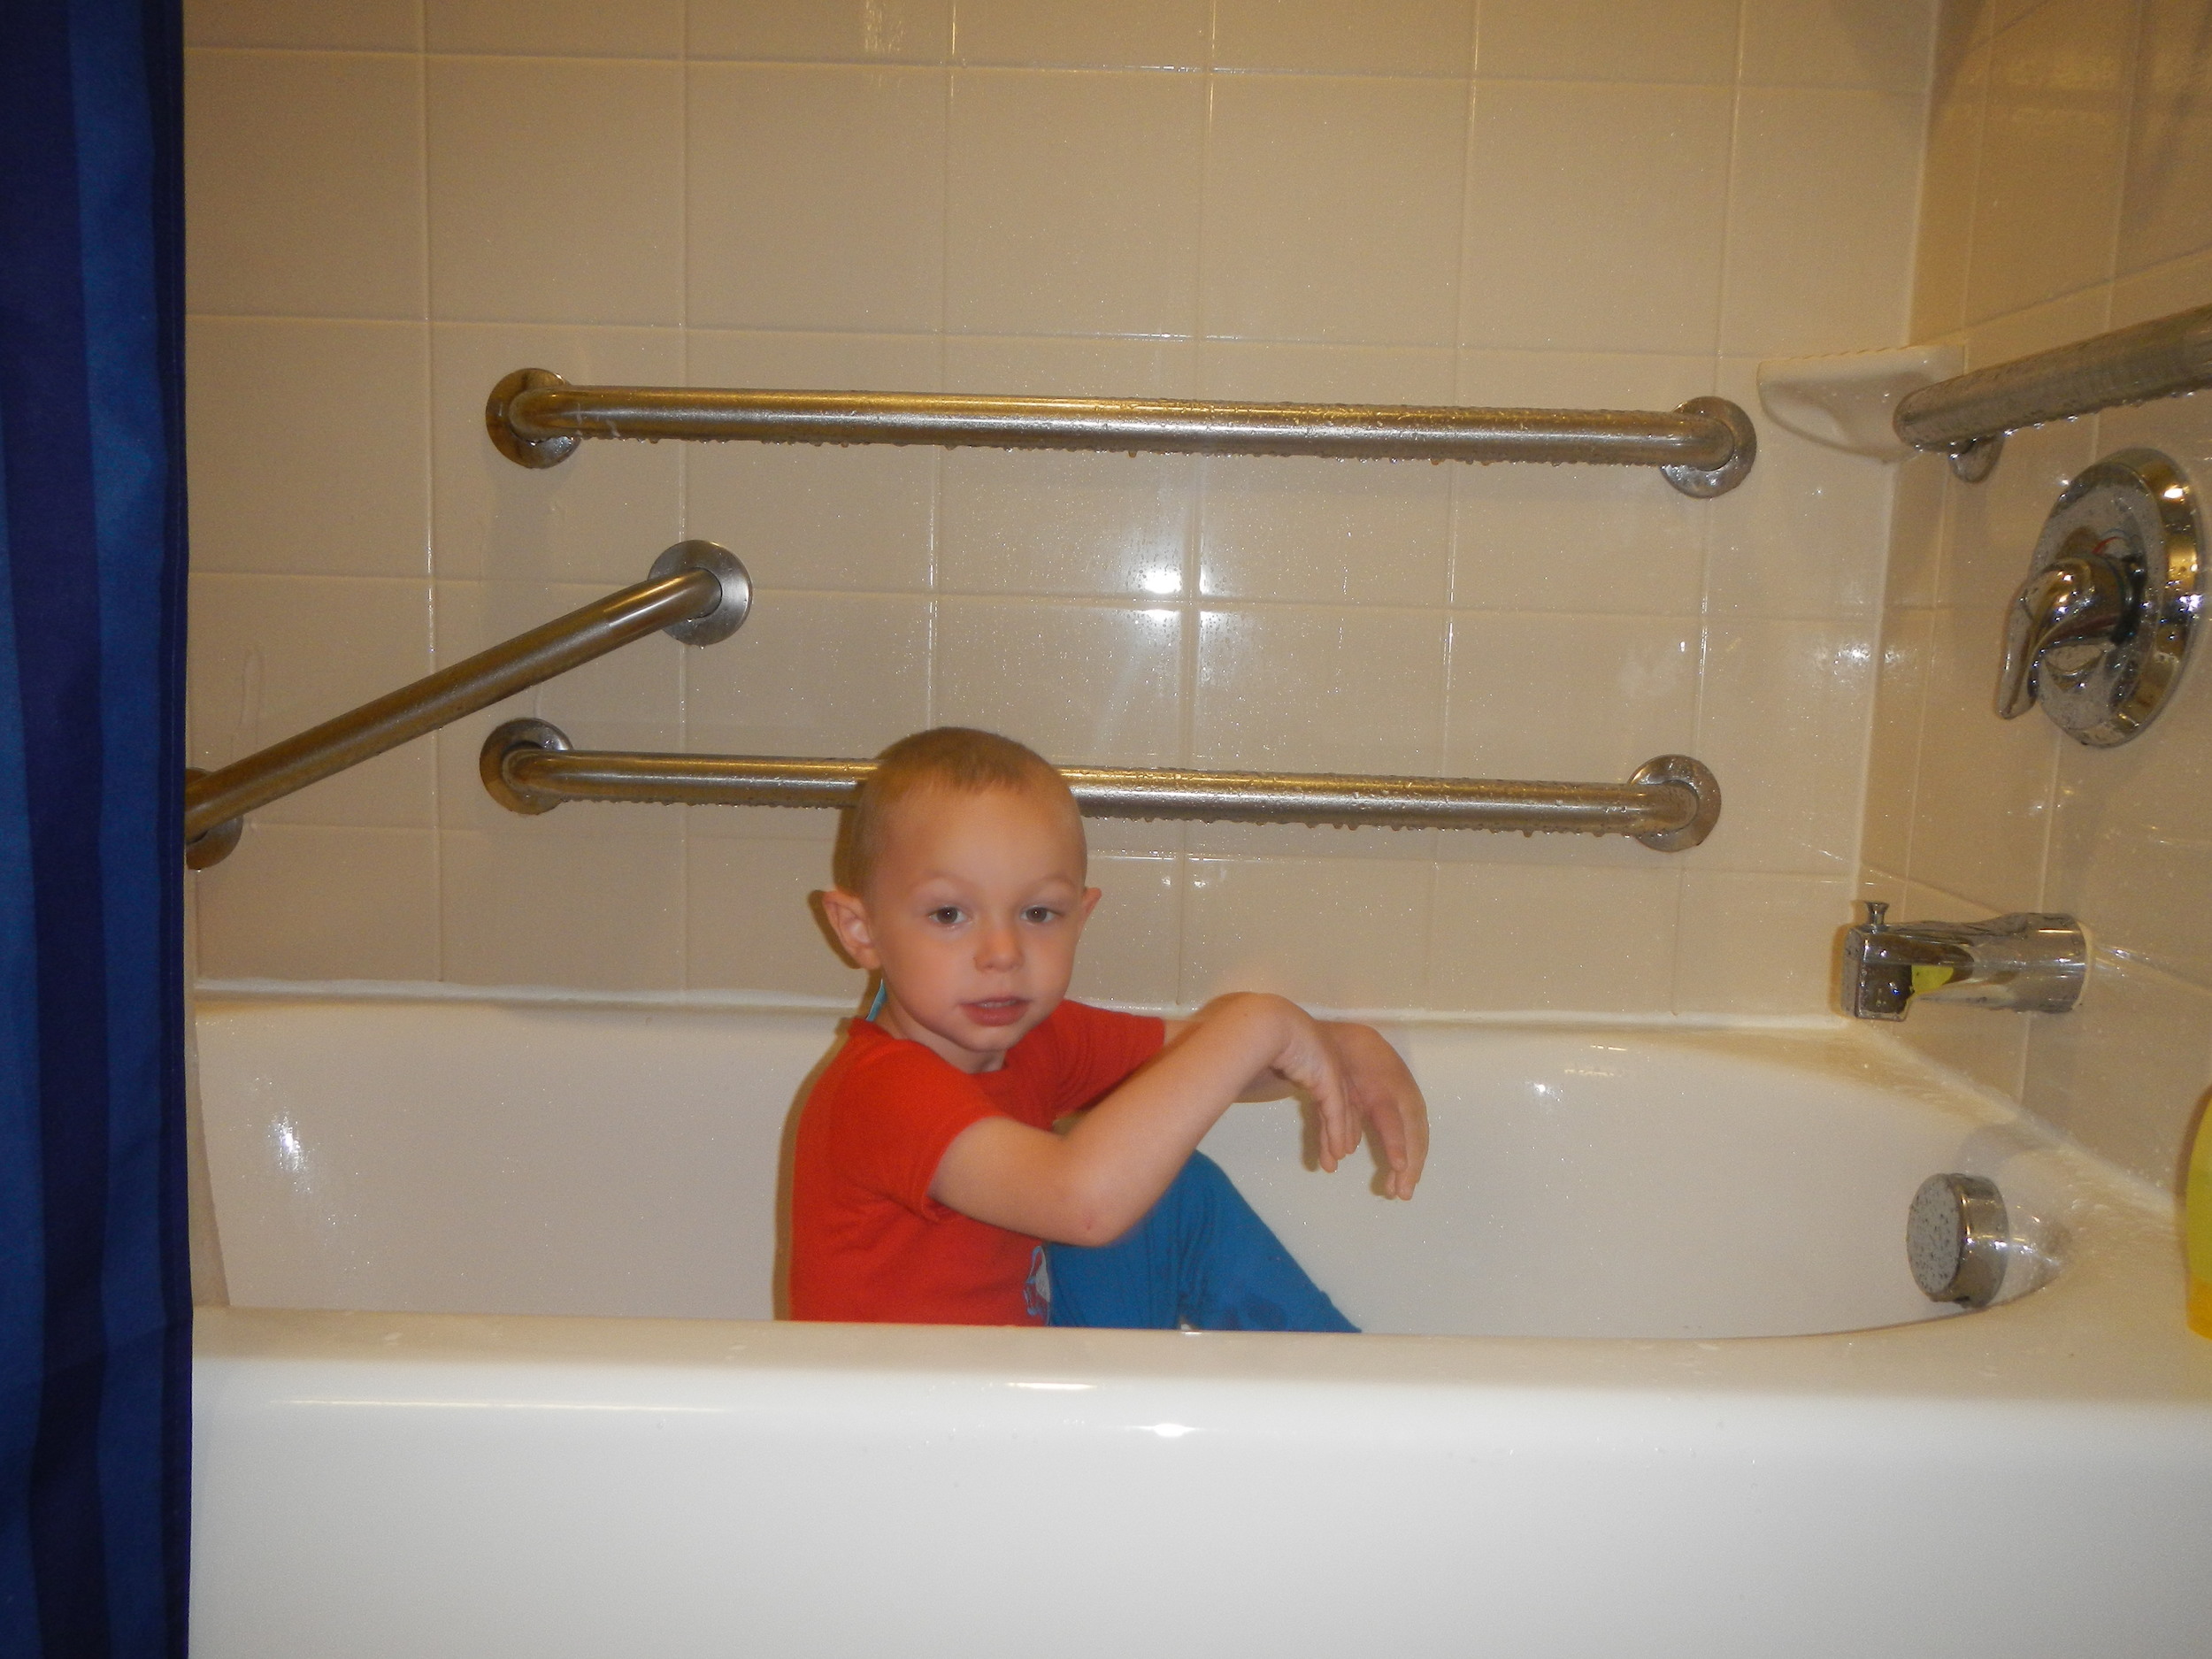  Of course, Ezra will always find a bathtub to sit in (even in our hotel room)! The bathtub is often times where Ezra goes to calm himself down. It is his "happy place." 